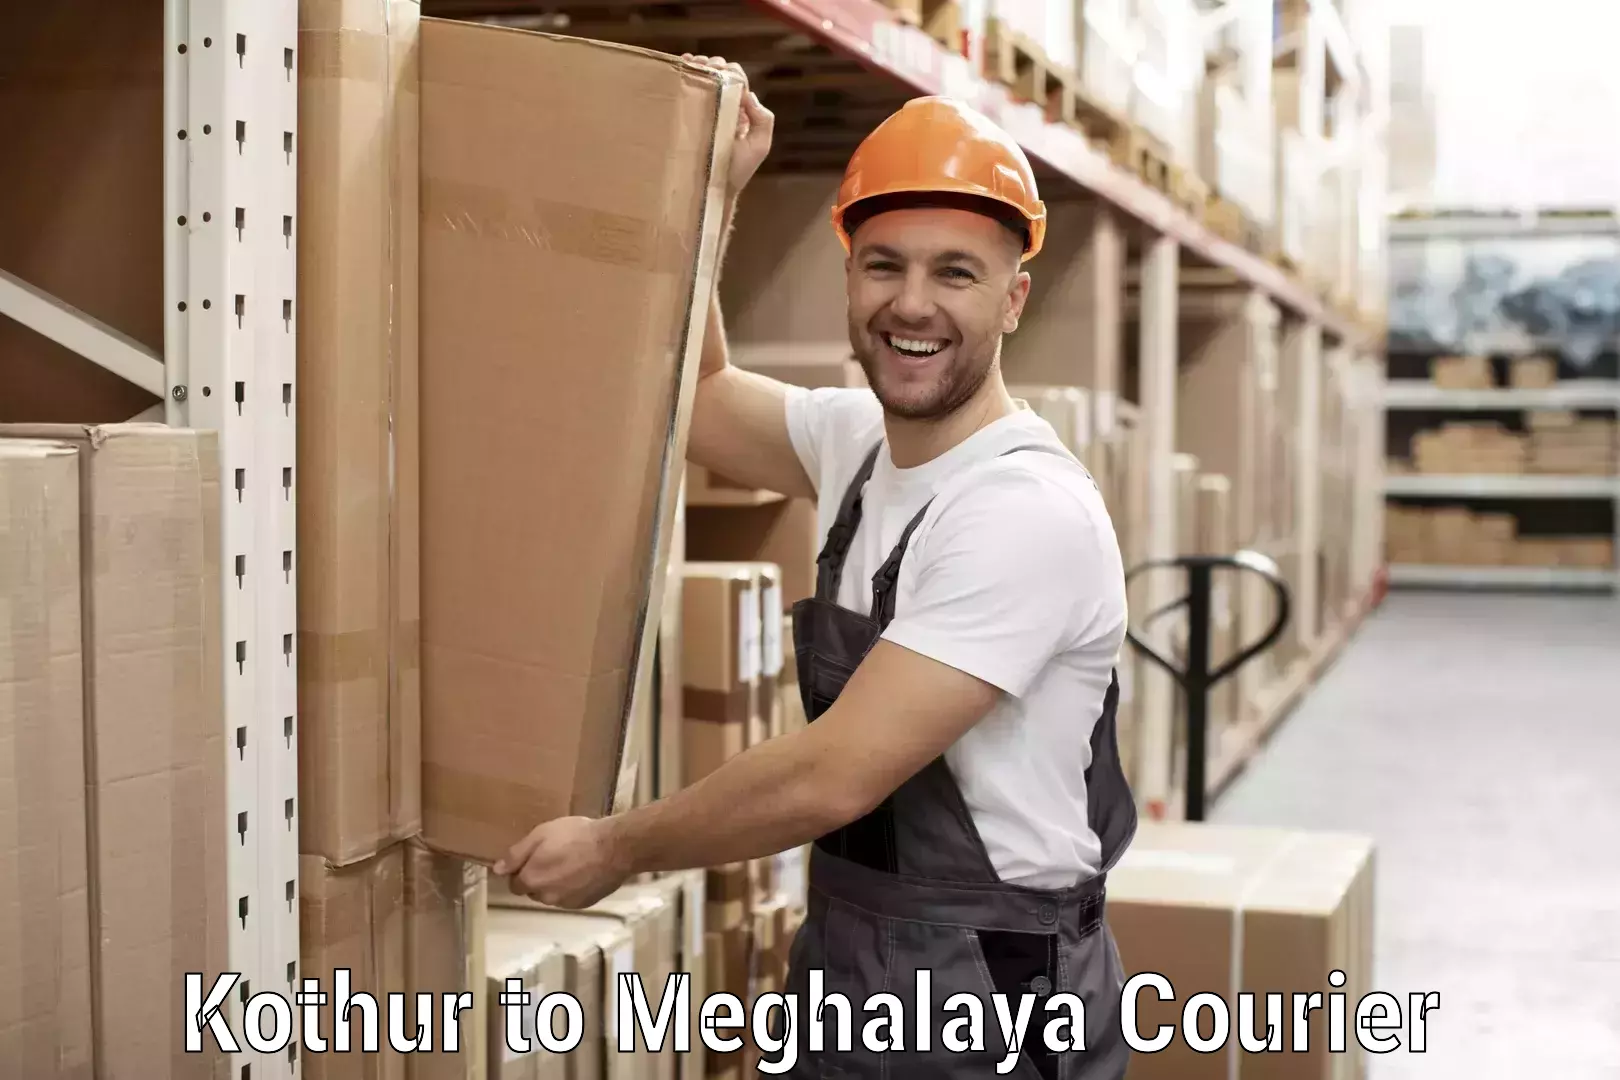 Express delivery network Kothur to Meghalaya